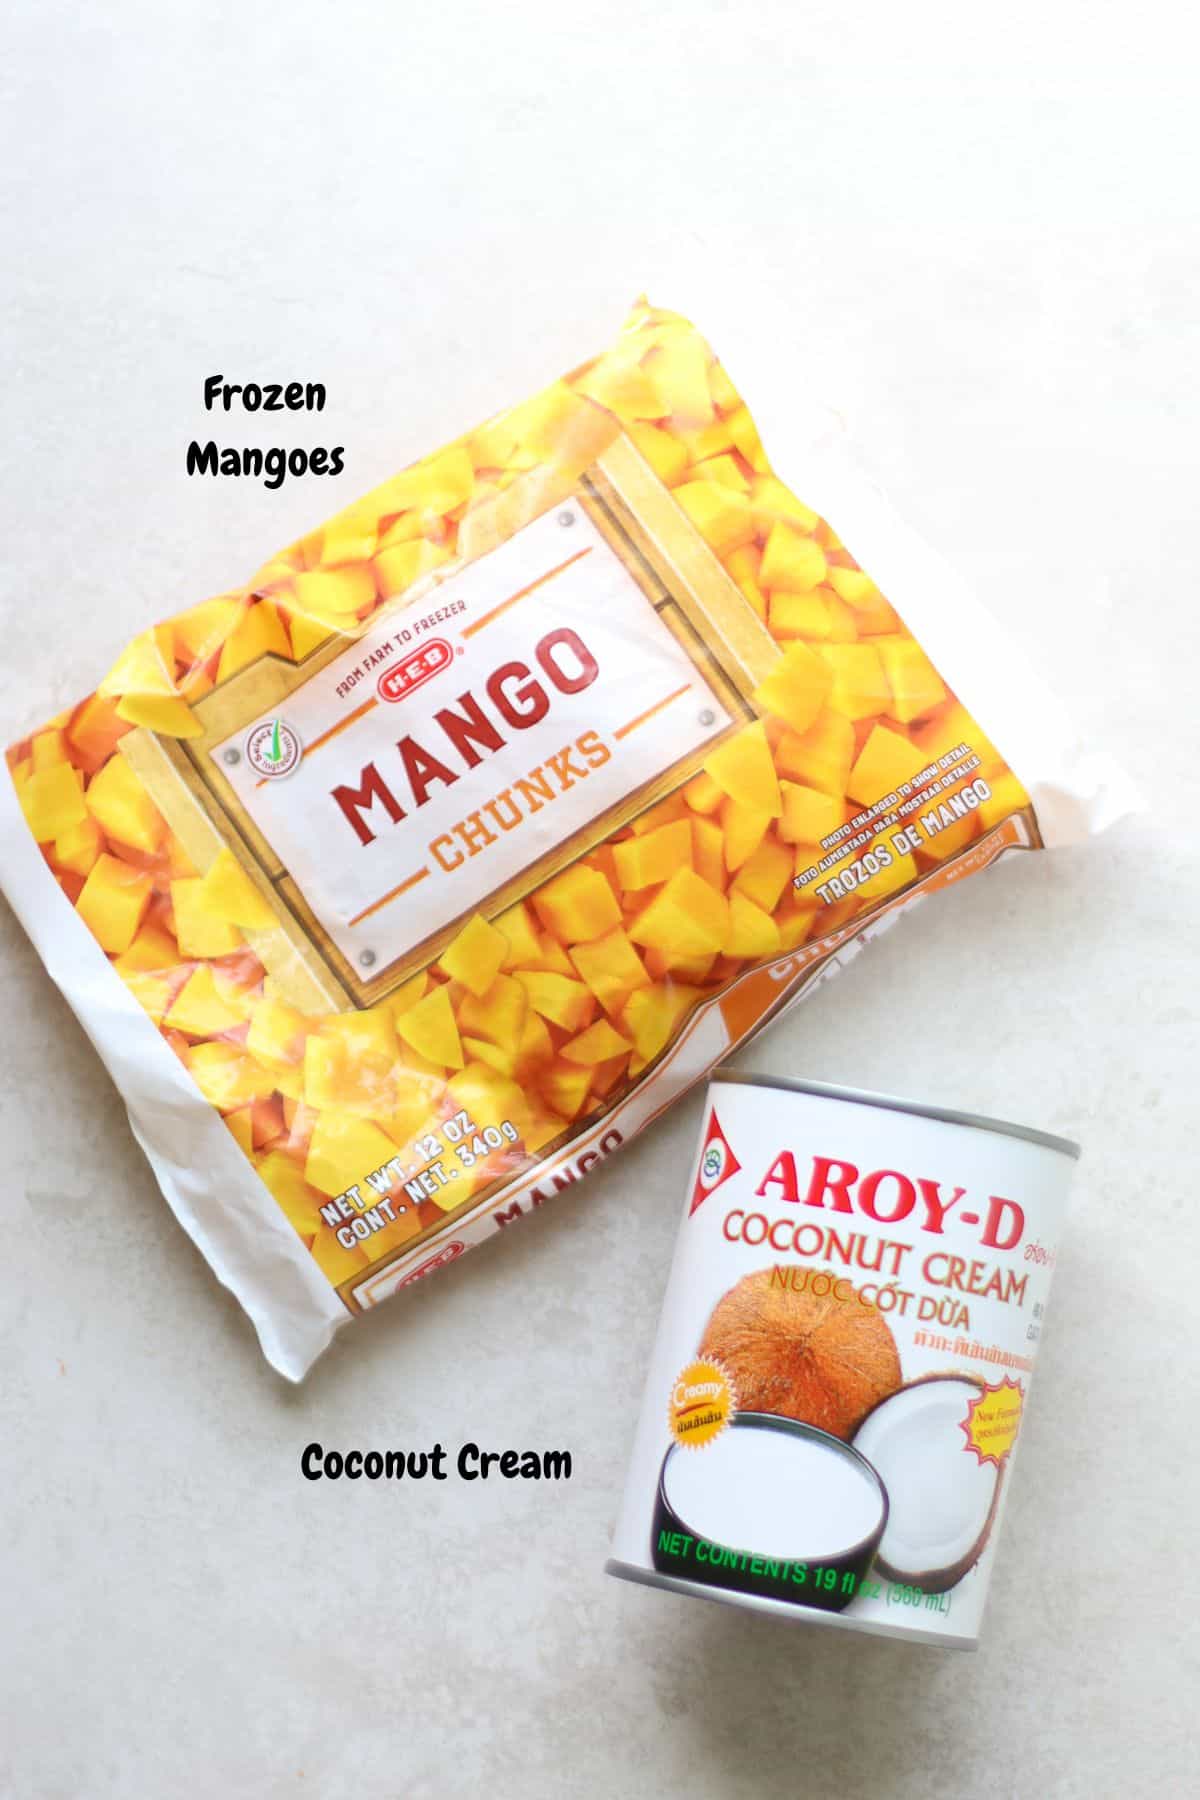 Frozen mangoes and coconut cream on a white background.